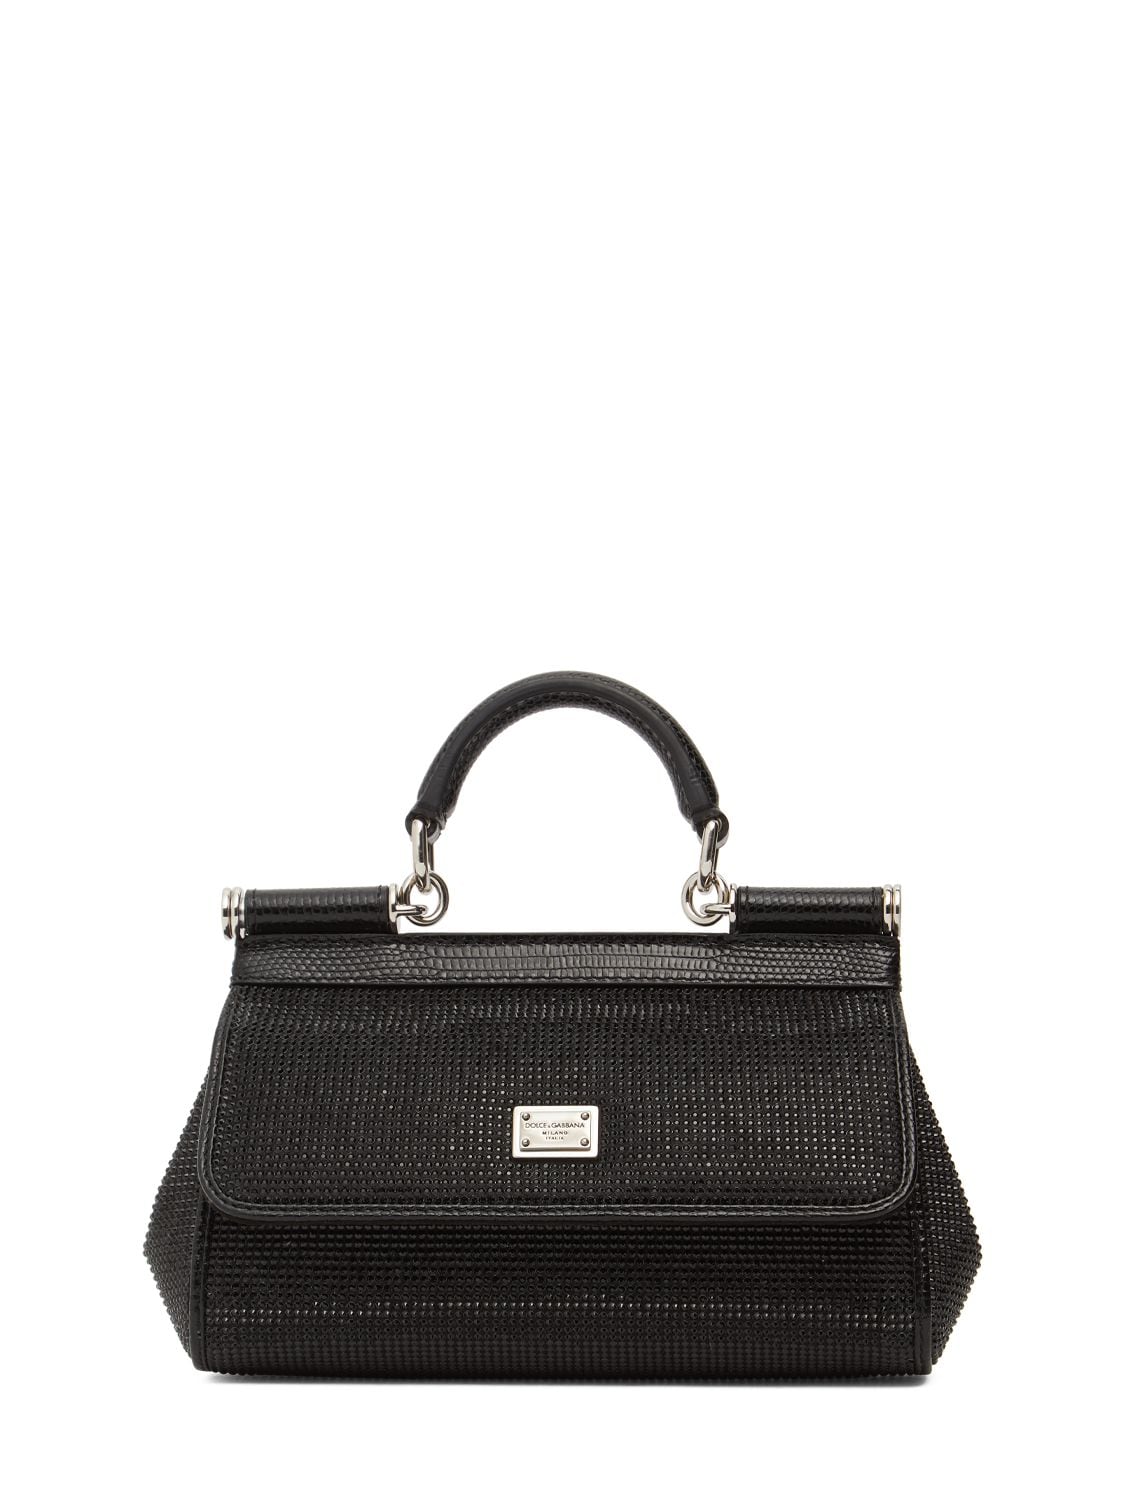 Dolce & Gabbana Micro Sicily Elongated Leather Bag In Black